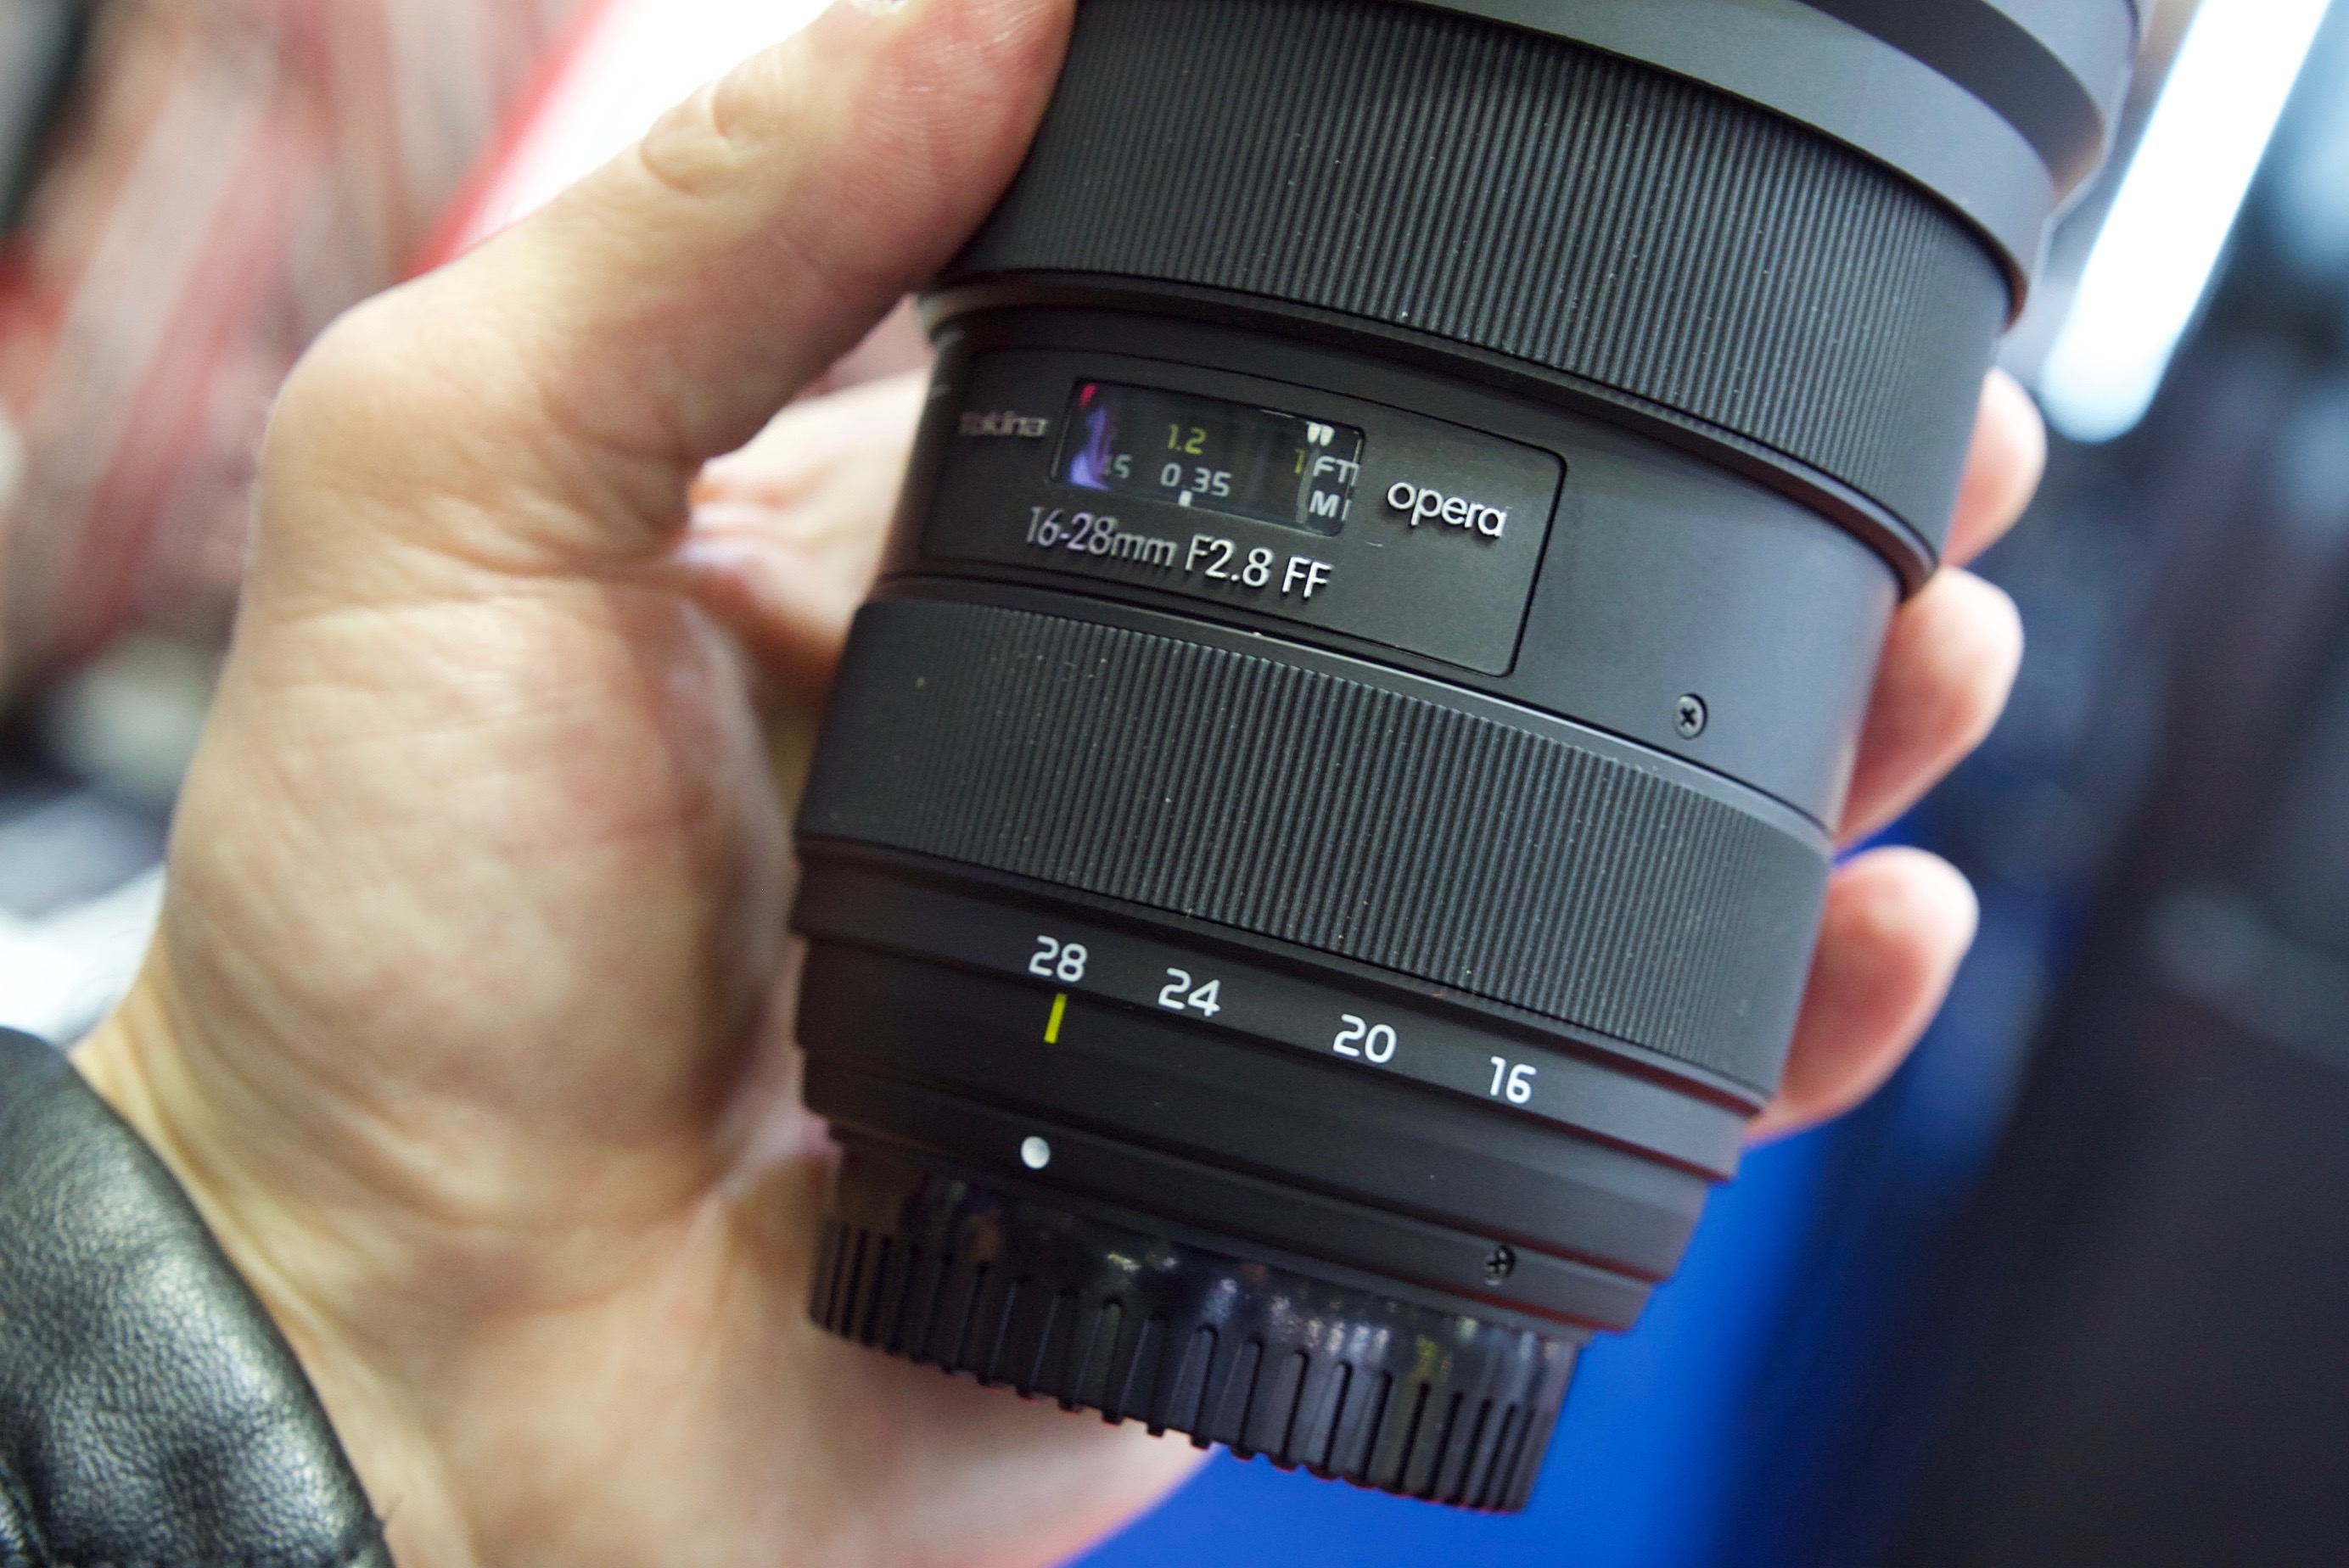 Tokina Opera 16-28mm F2.8 FF hands-on at CP+ 2019 - Newsshooter